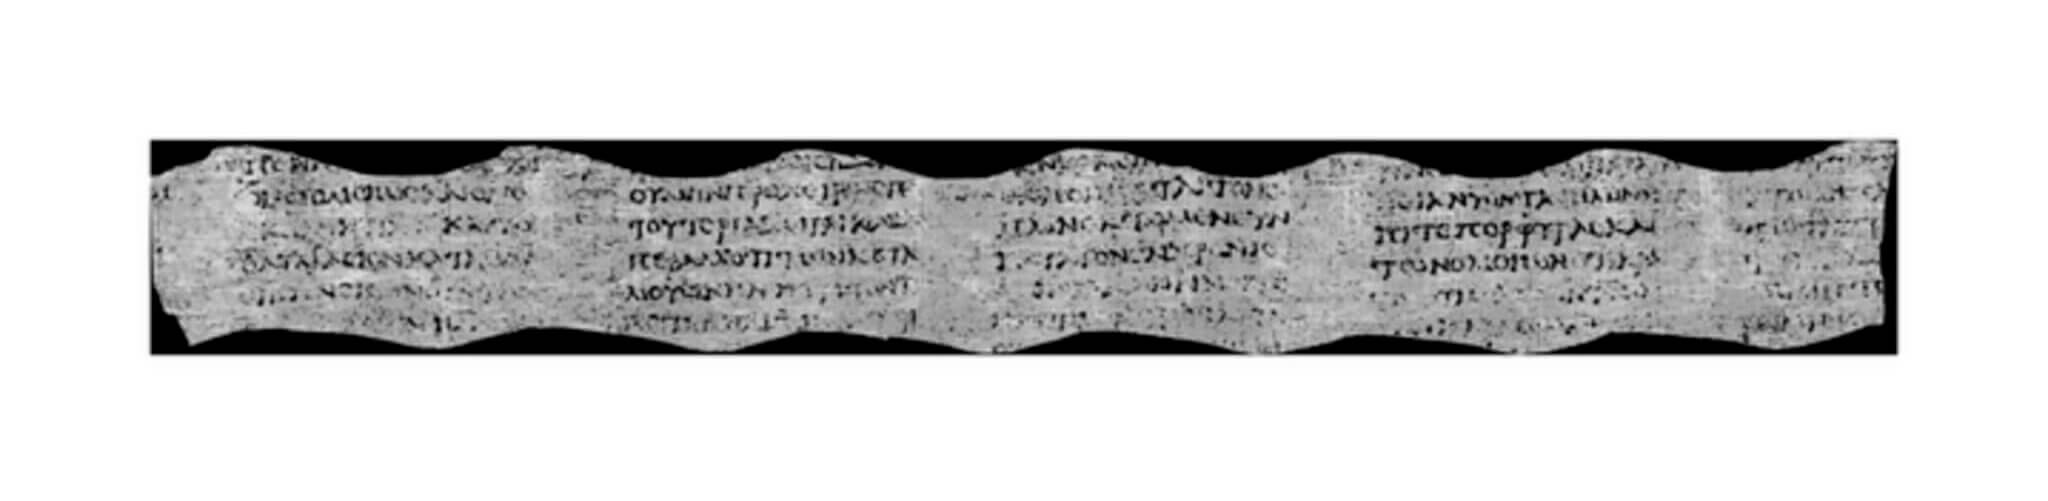 The image (seen above) depicting the text comes from a wrap of papyrus buried deep within the completely unopened, intact, carbonized scroll